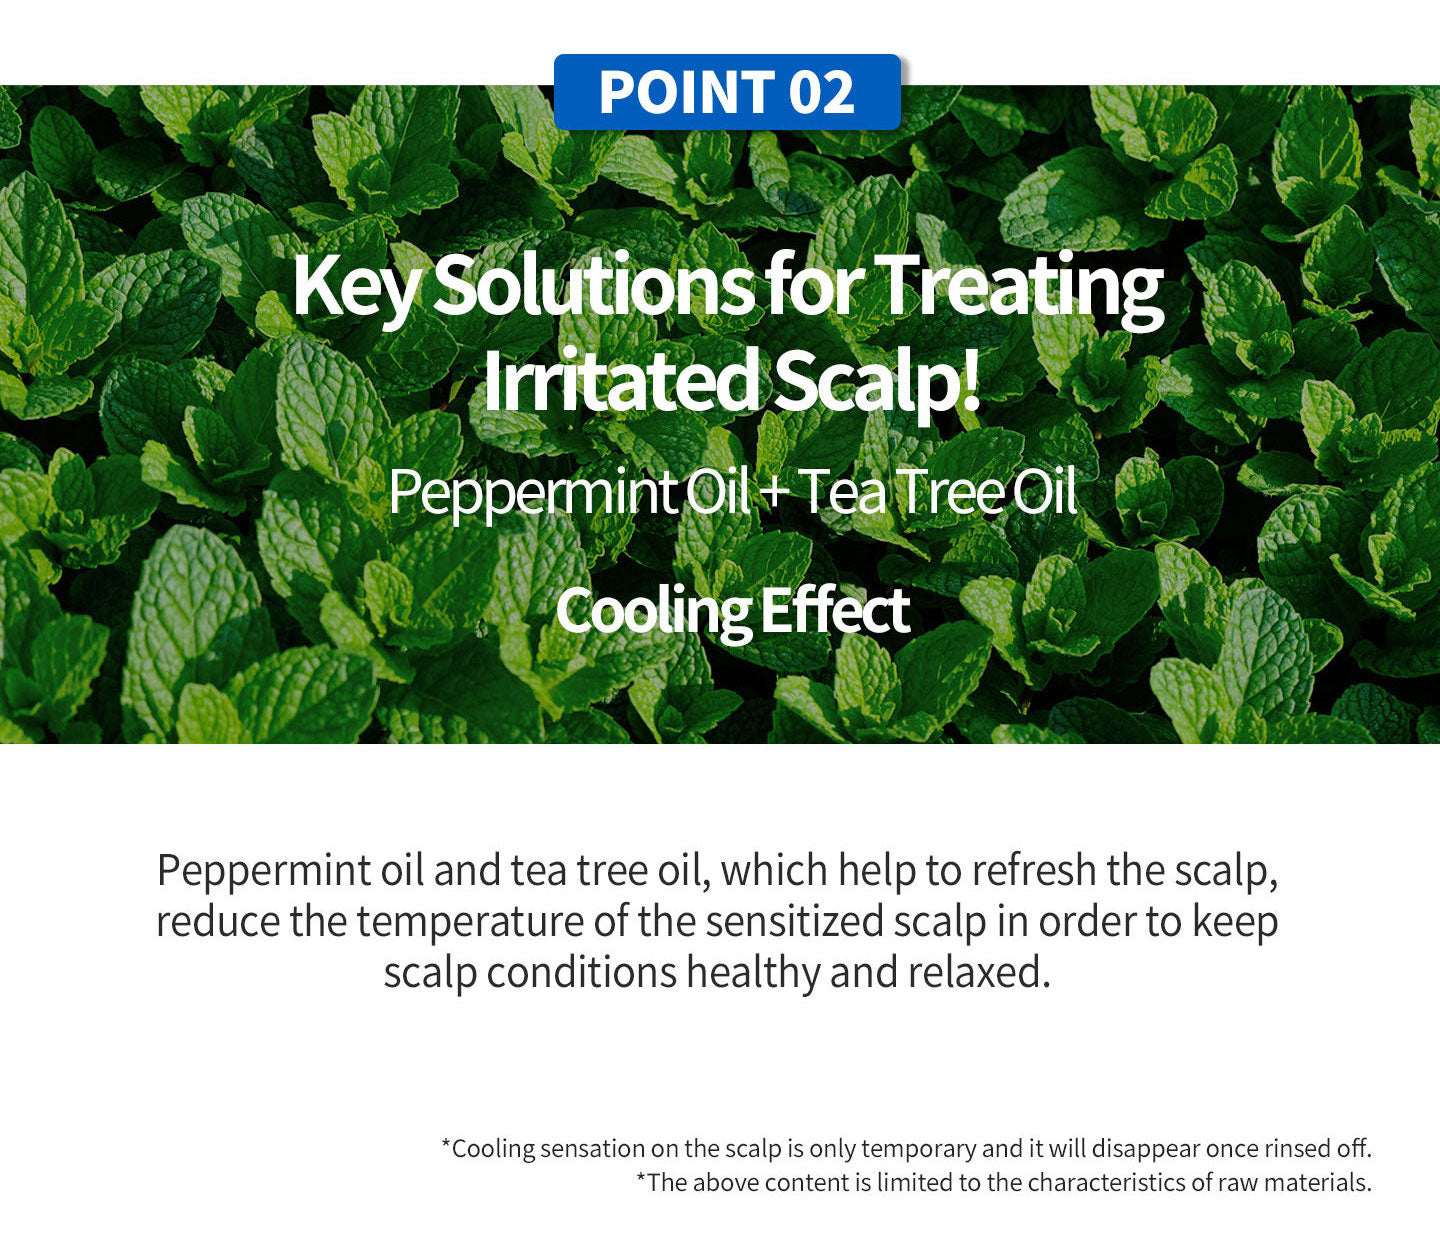 Key solutions for treating irritated scalp! Peppermint oil + tea tree oil cooling effect. Peppermint oil and tea tree oil, which help to refresh the scalp, reduce the temperature of the sensitized scalp in order to keep scalp conditions healthy and relax